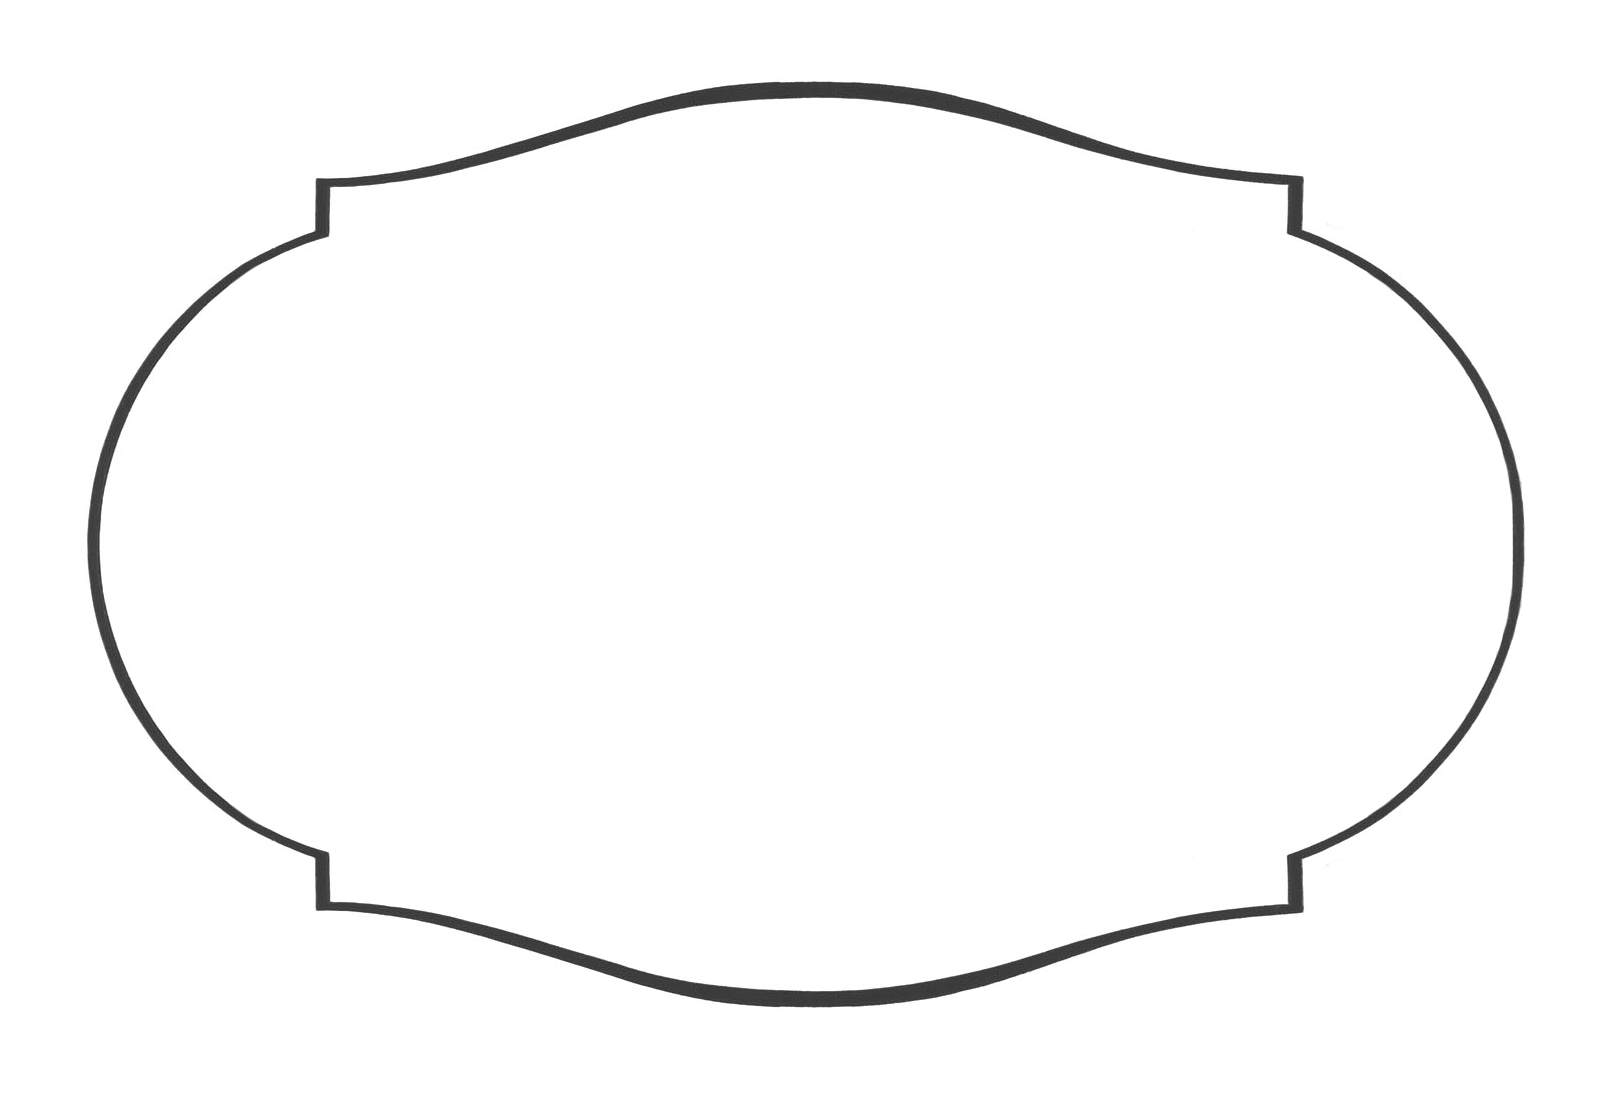 Free Label Shapes Cliparts, Download Free Clip Art, Free.